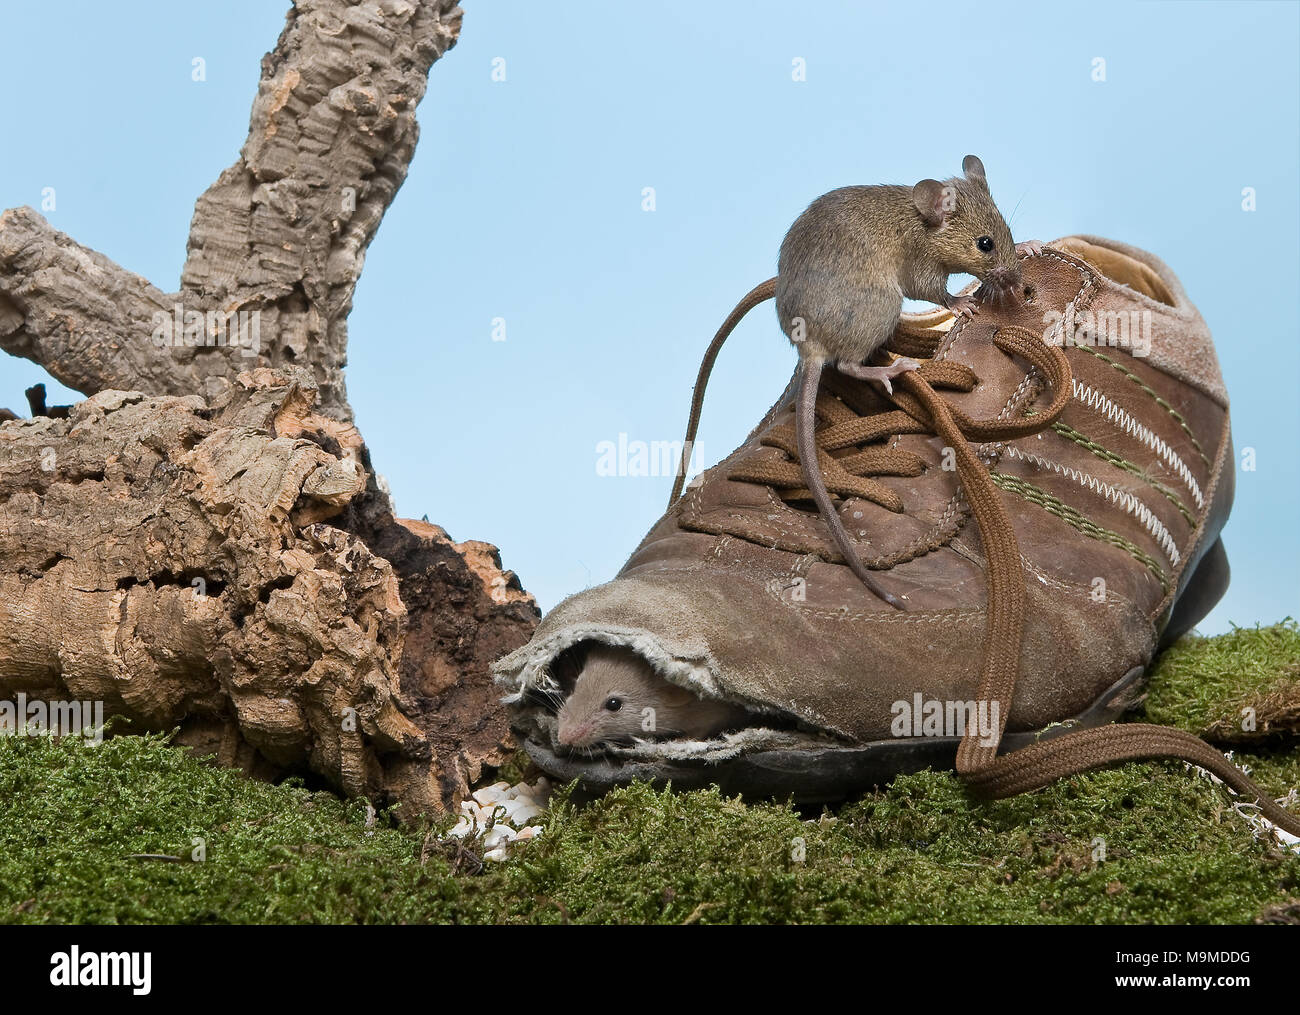 Two little mice finding a new home in an old grungy shoe Stock Photo